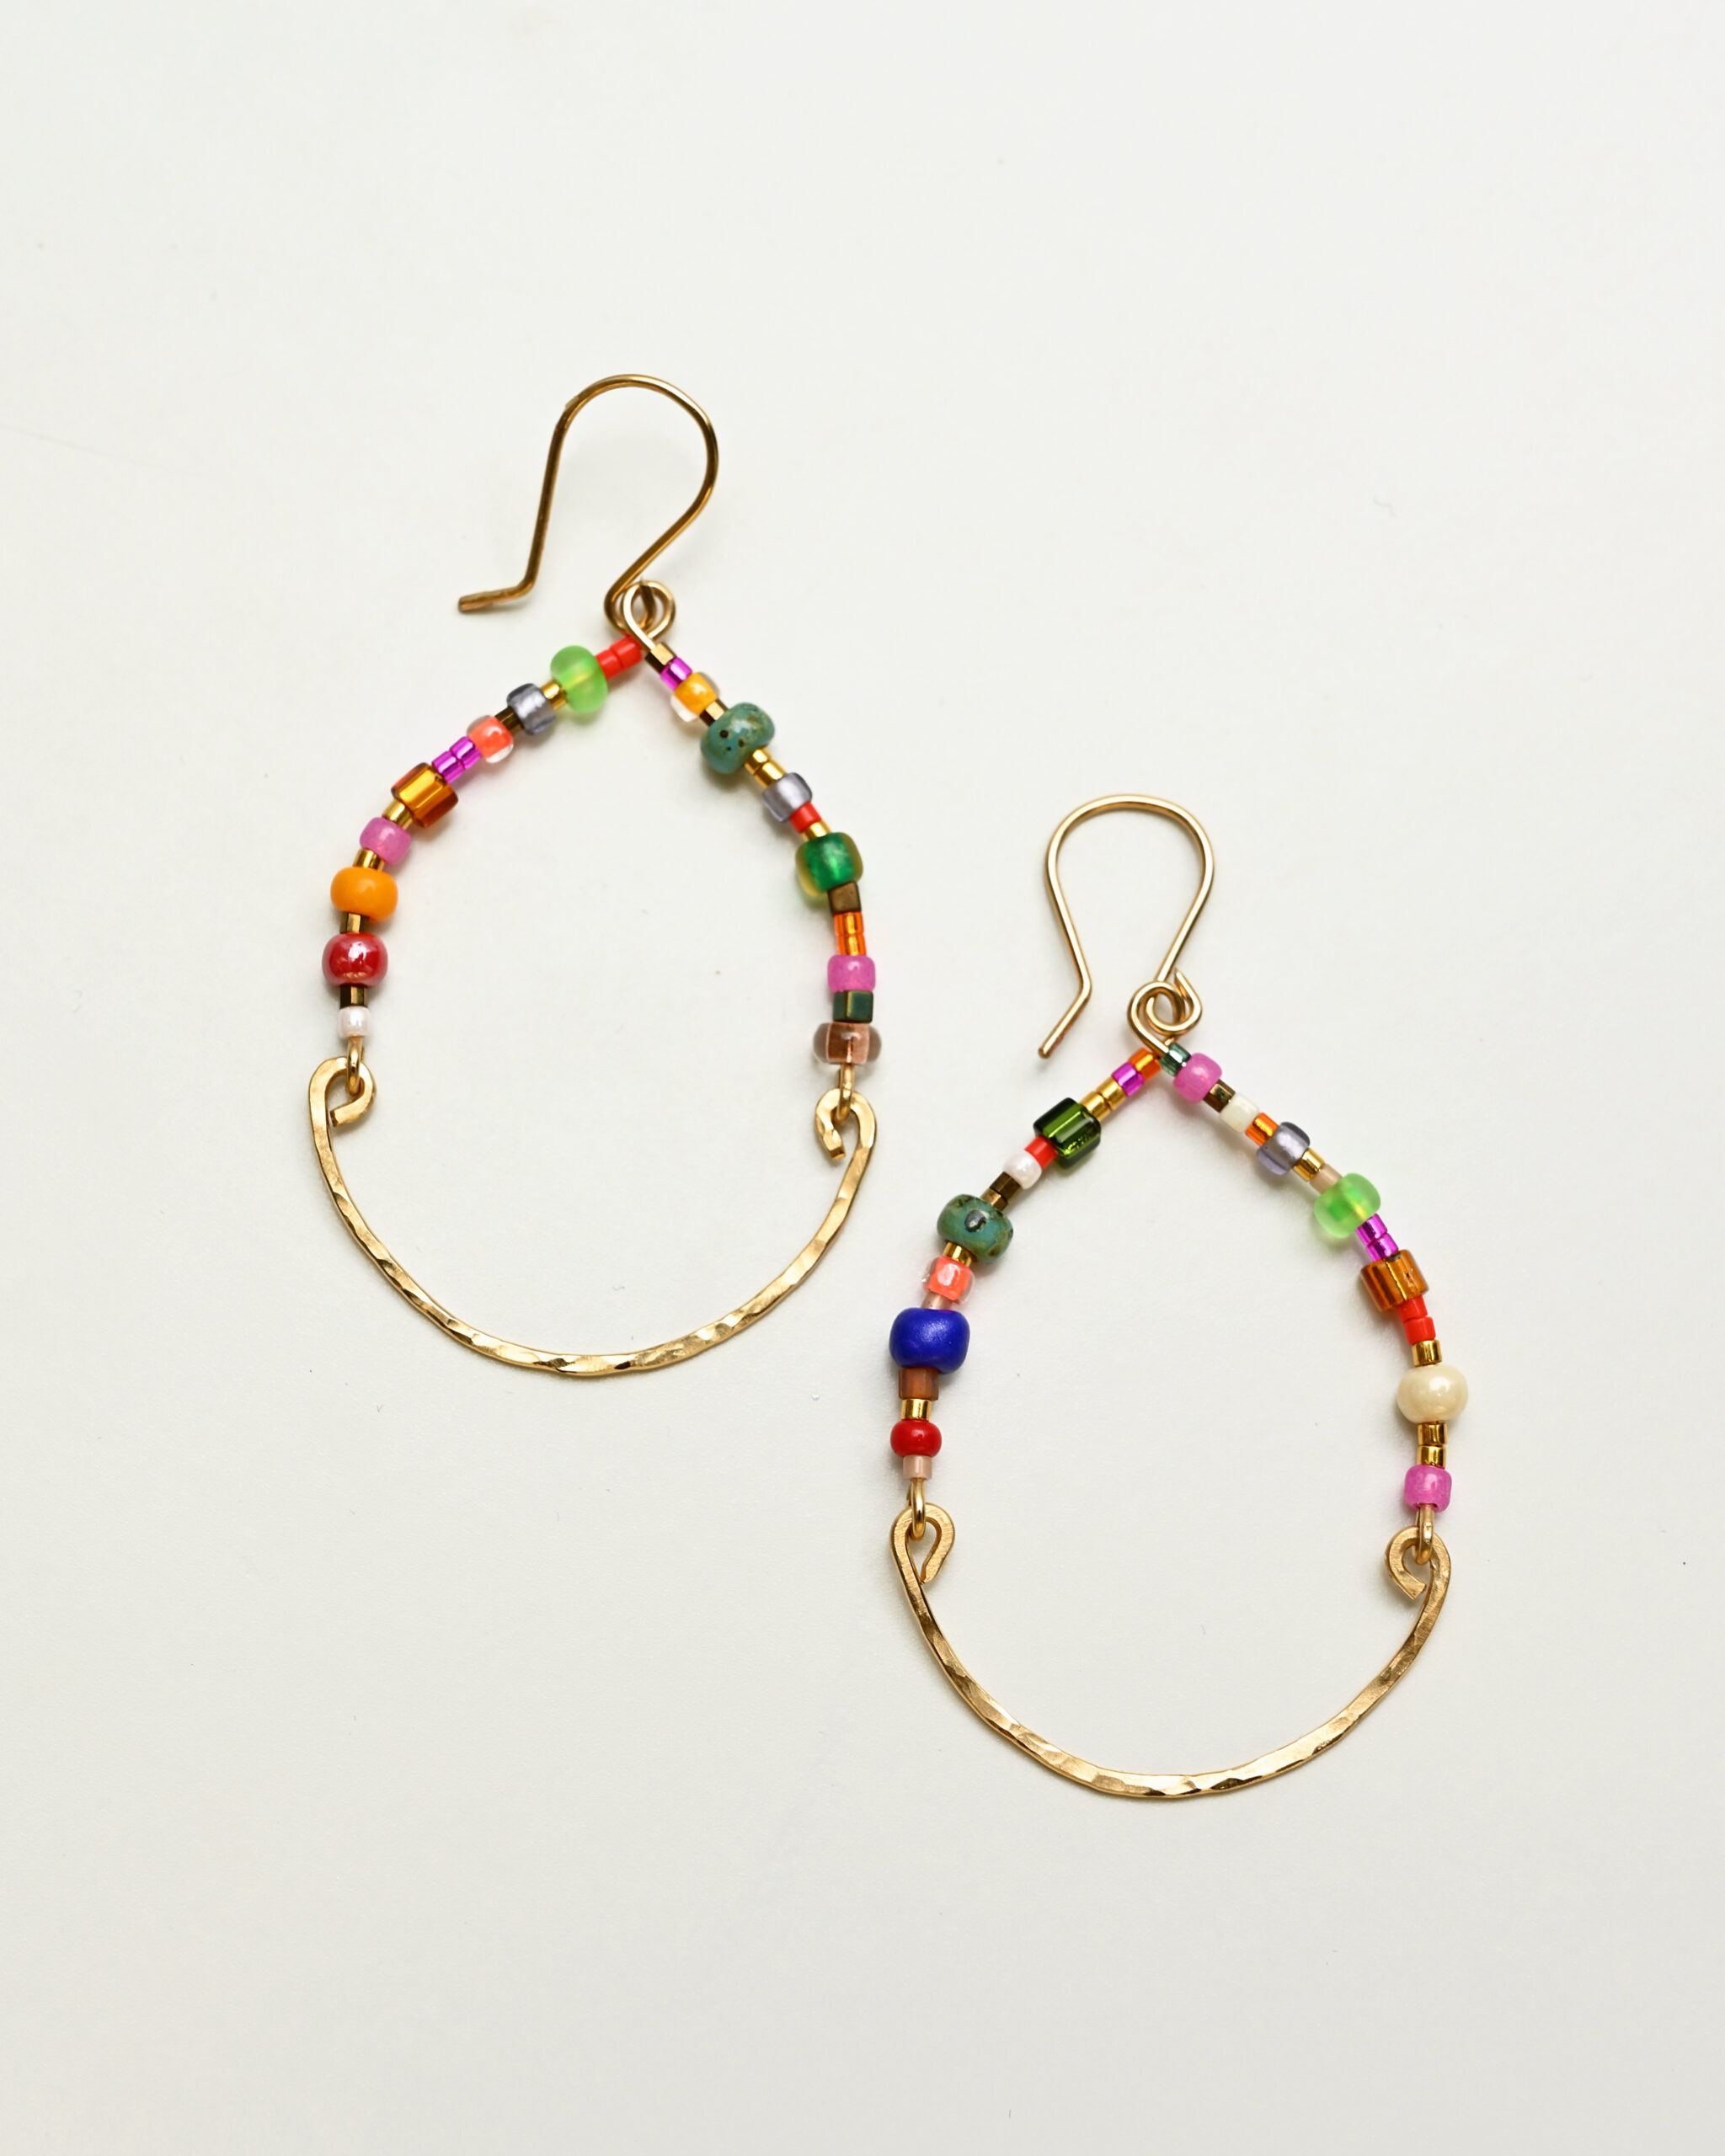 14k gold filled drop earrings with multicolored japanese glass beads